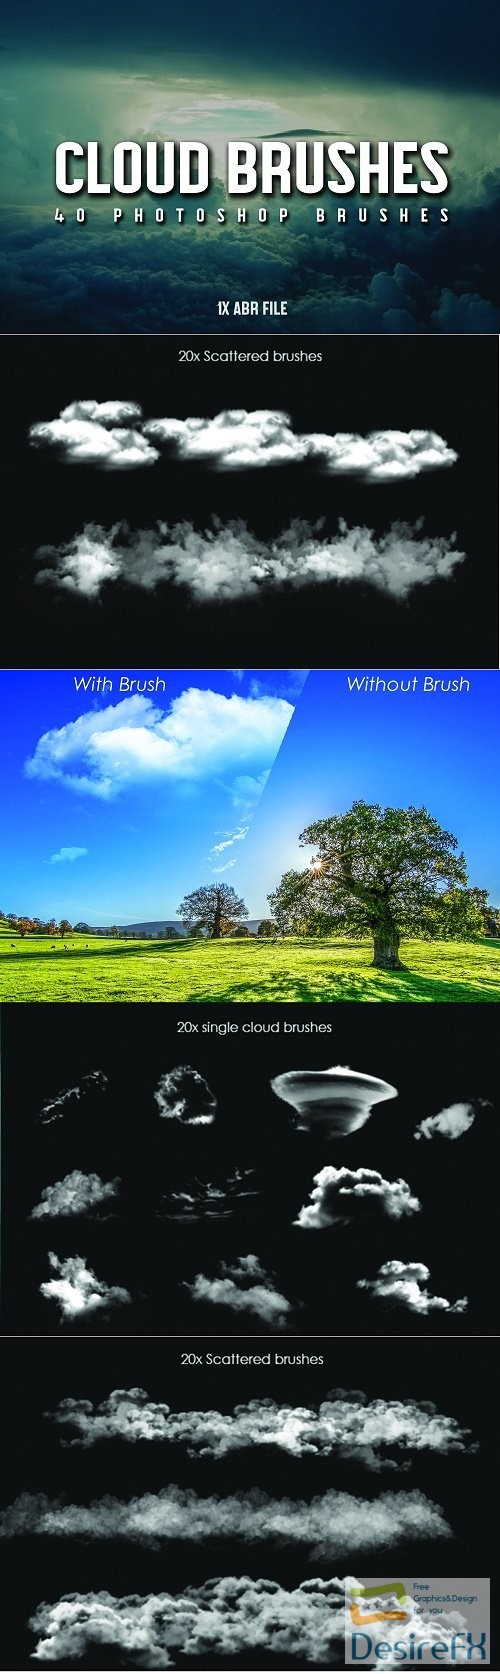 40 Cloud Brushes for Photoshop - 3799716